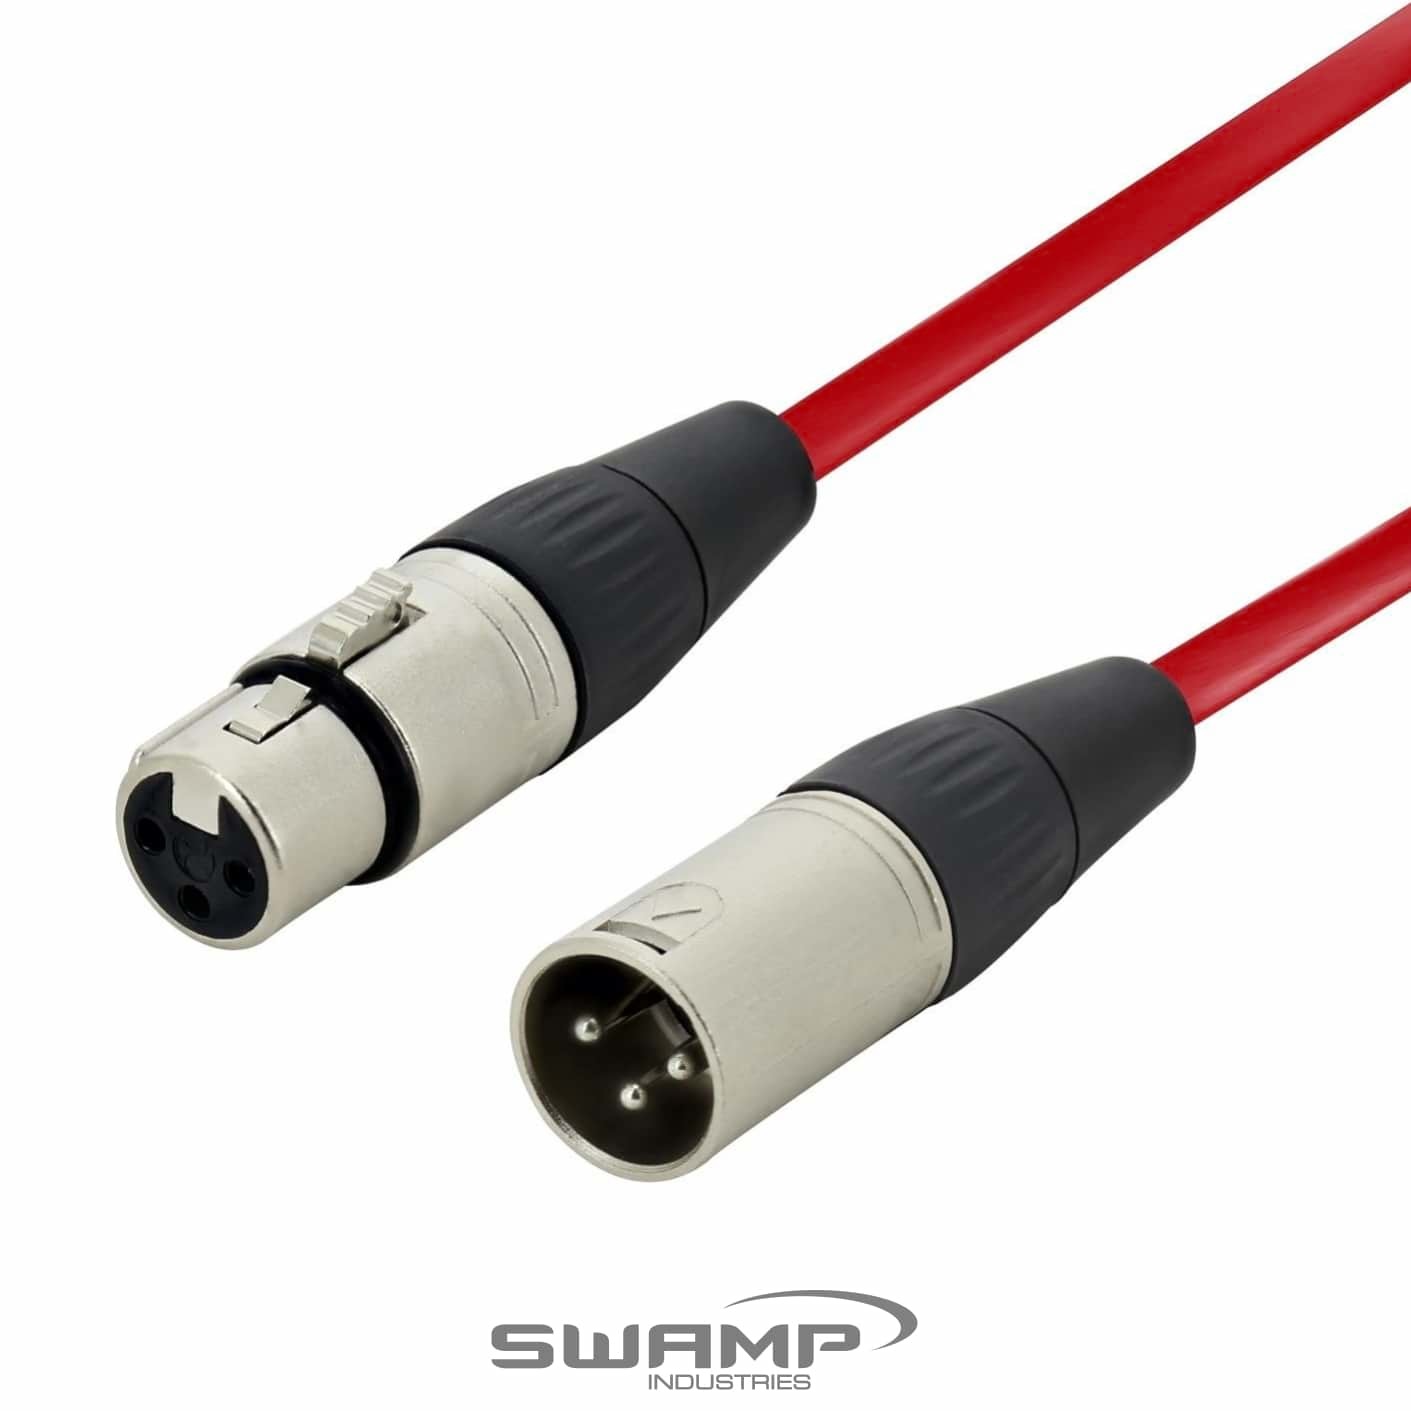 SWAMP Colour Code XLR Mic Cable - Balanced Microphone Lead - Selectable Length